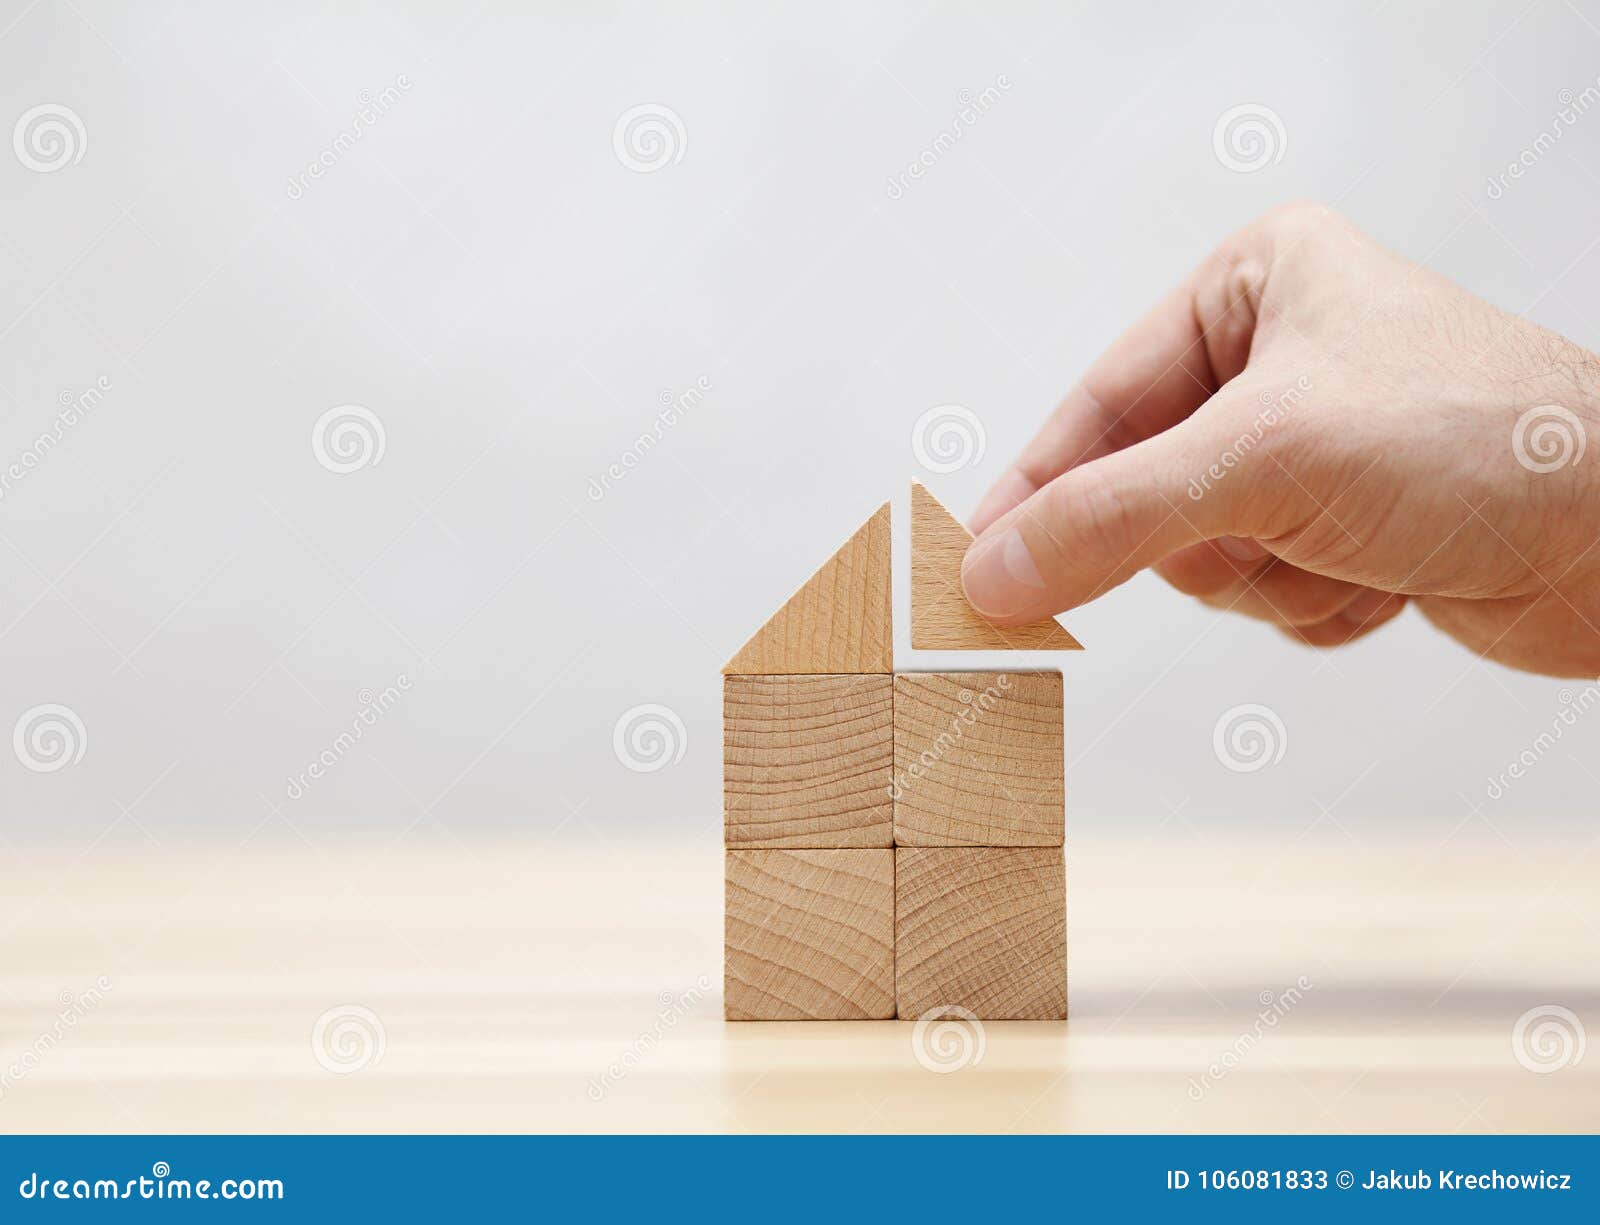 hand building house with wooden blocks